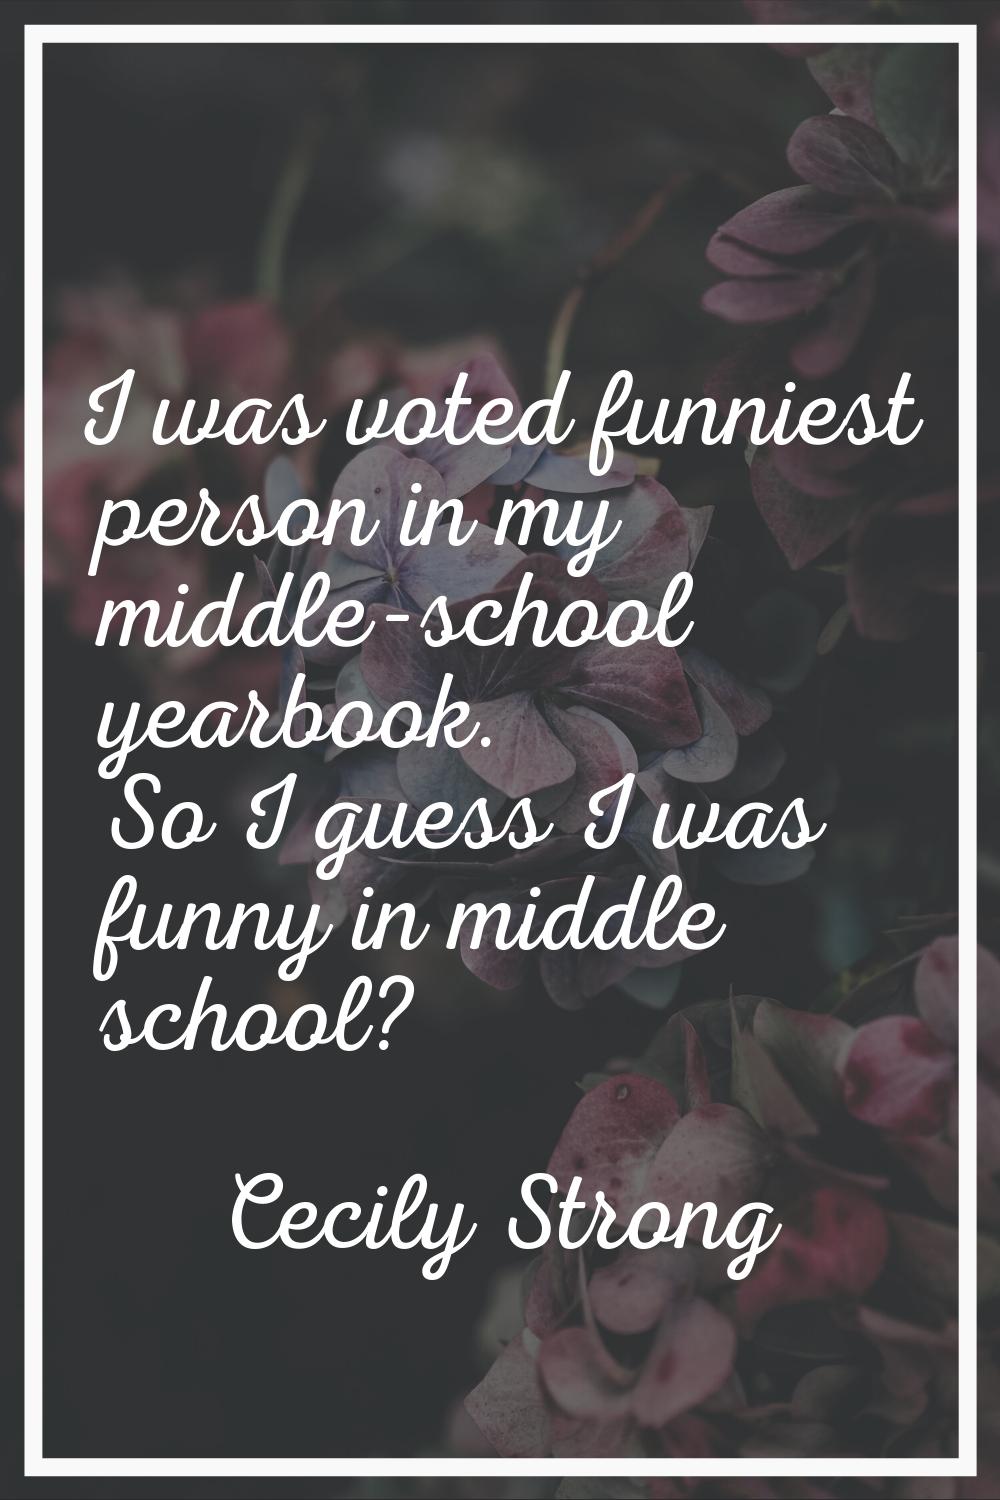 I was voted funniest person in my middle-school yearbook. So I guess I was funny in middle school?